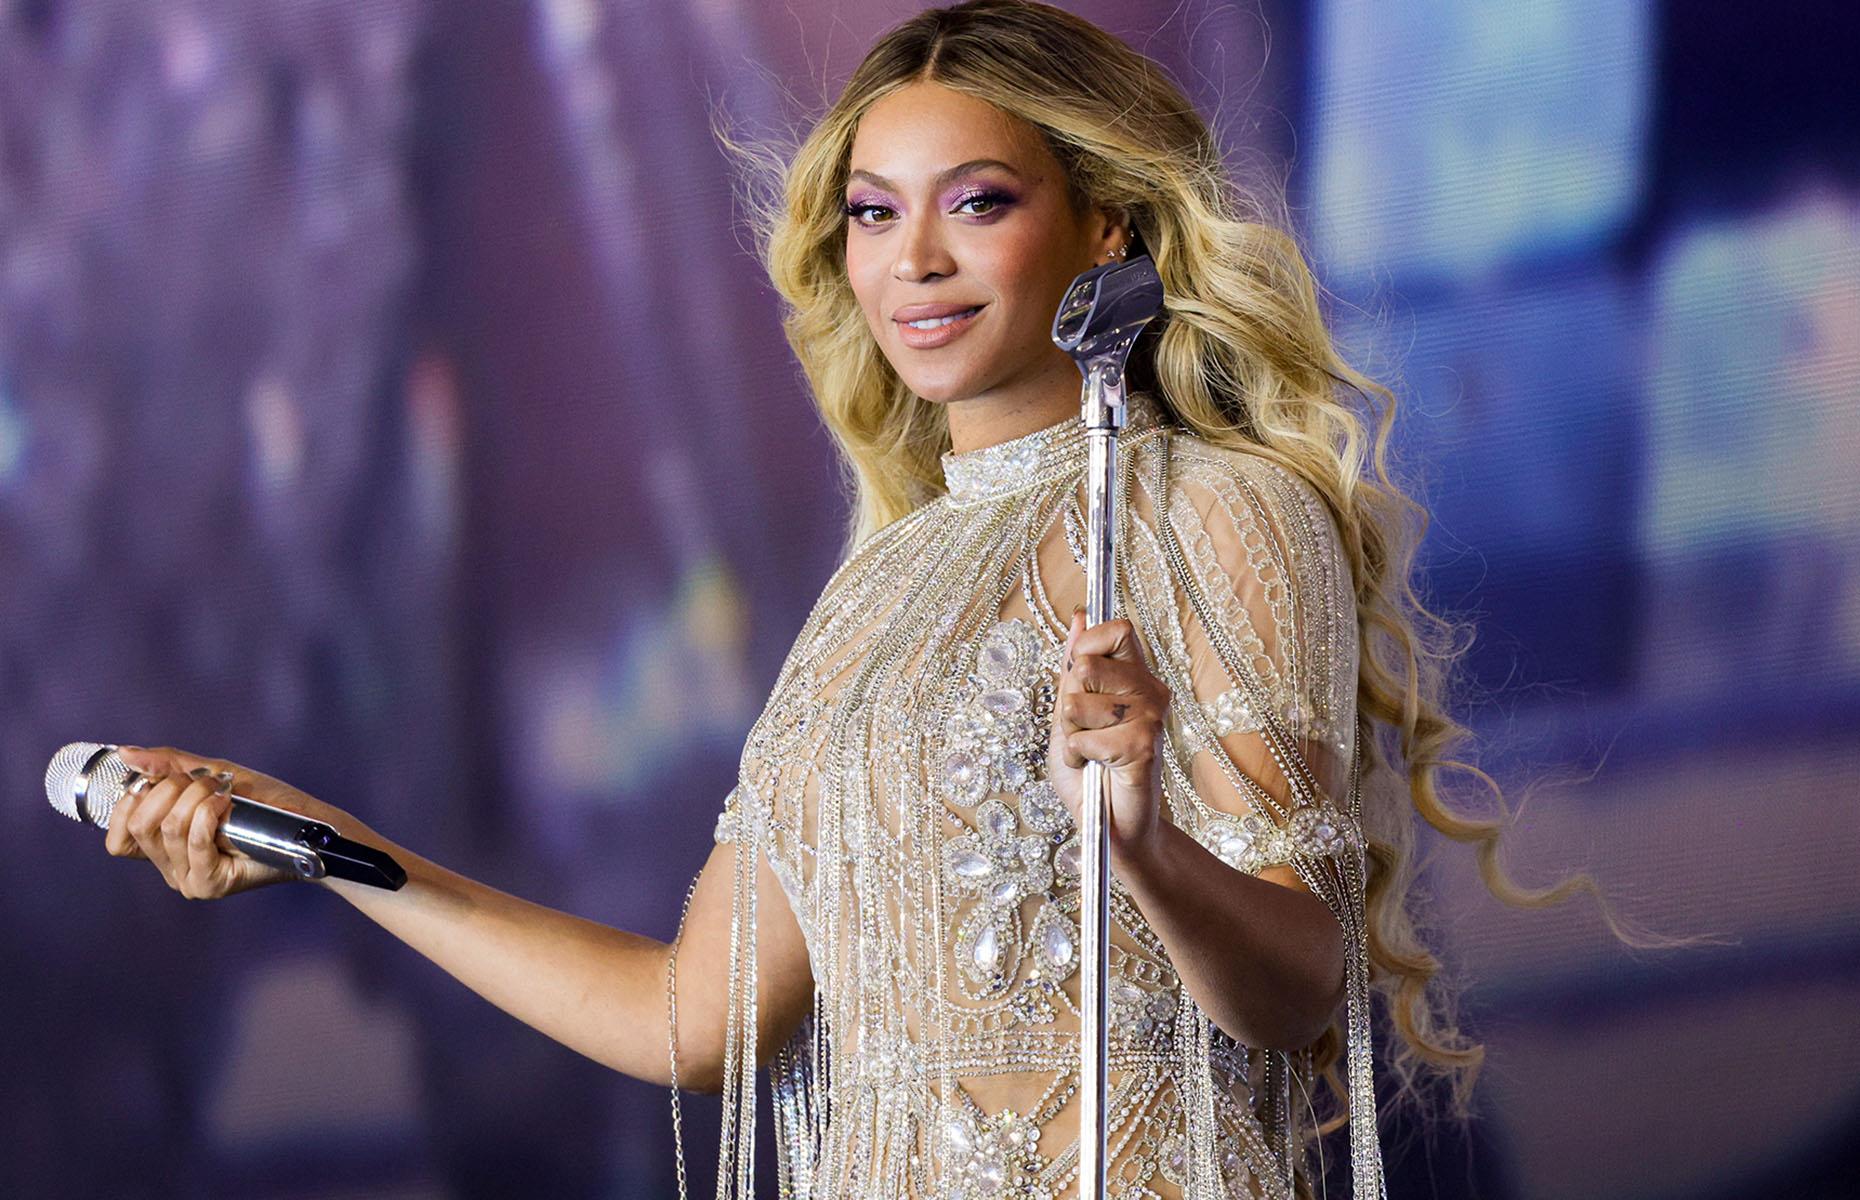 <p>In addition to releasing chart-topping records, Beyoncé significantly boosts her fortune through touring. In 2016, her <em>Formation World Tour</em> grossed an impressive $250 million.</p>  <p>In 2018, Beyoncé and Jay-Z joined forces for the <em>On the Run II </em>tour, with both icons performing their biggest solo hits as well as duets.  The tour included 48 live shows across North America and Europe, grossing a grand total of $250 million.</p>  <p>Beyoncé's recent <em>Renaissance World Tour</em> marked her most successful to date. It sold 2.8 million tickets across 56 shows in North America and Europe, generating a stunning $580 million in revenue. That makes it the highest-grossing tour in history for both an R&B artist and a Black female artist.</p>